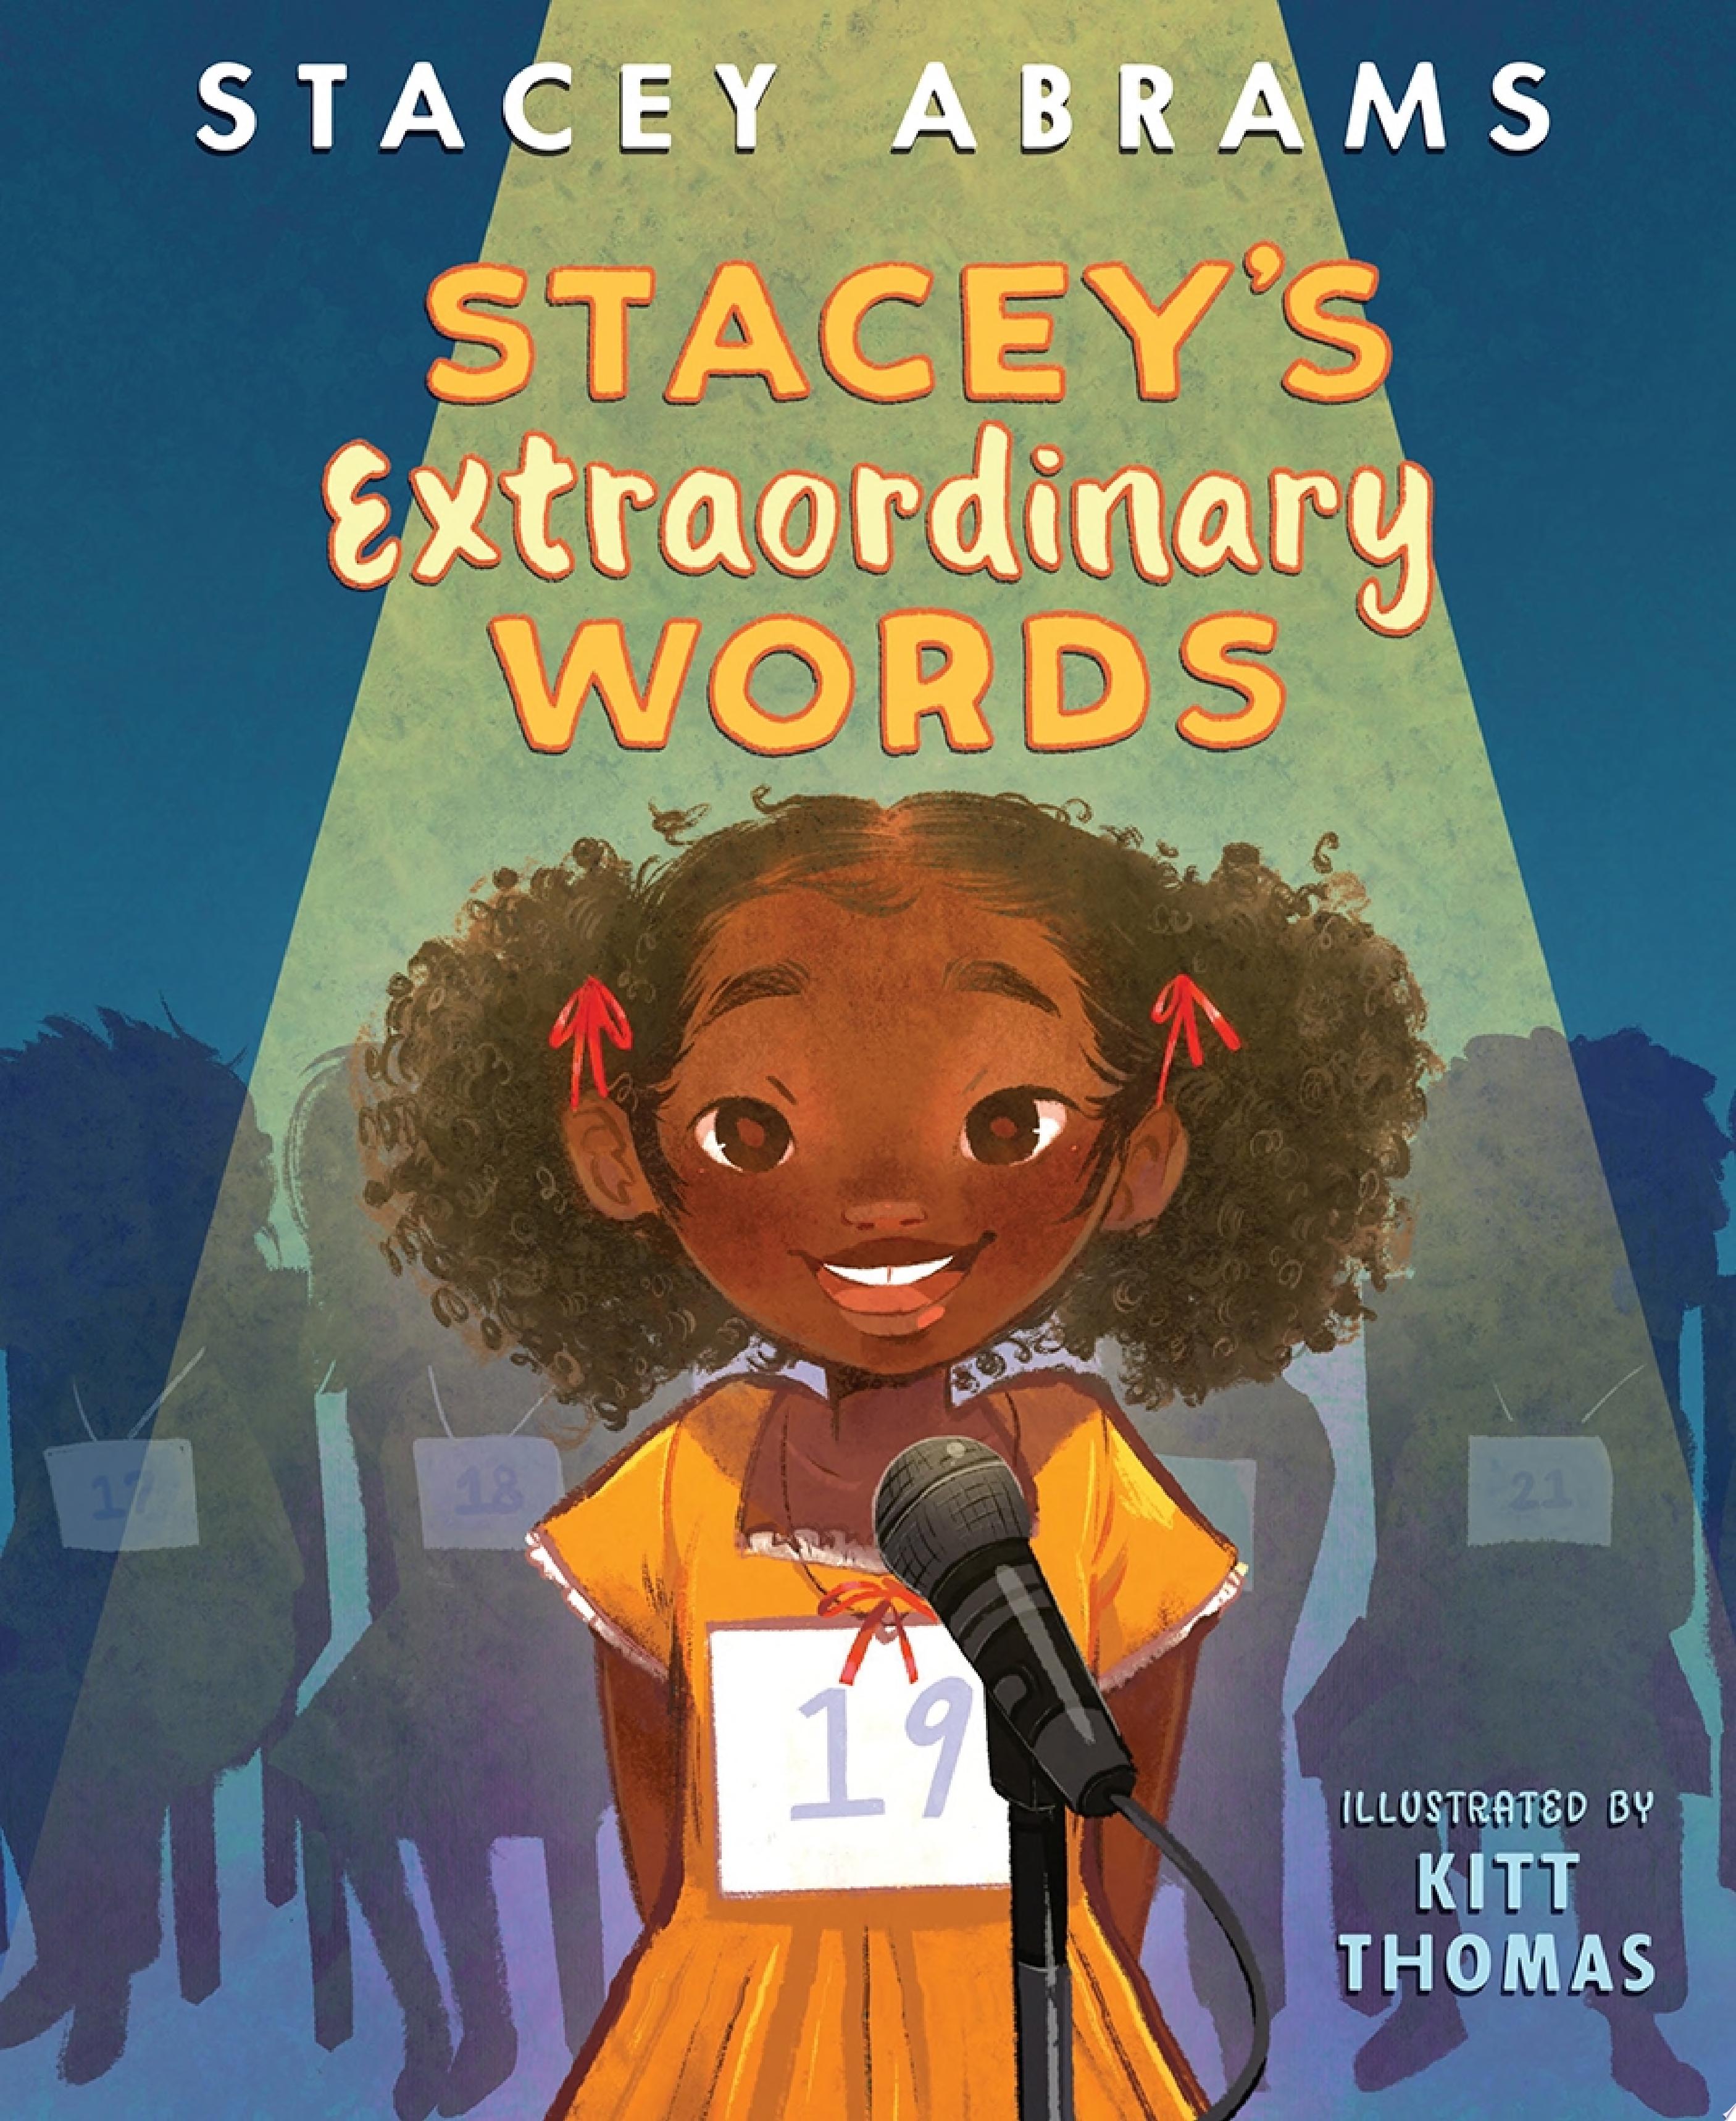 Image for "Stacey&#039;s Extraordinary Words"